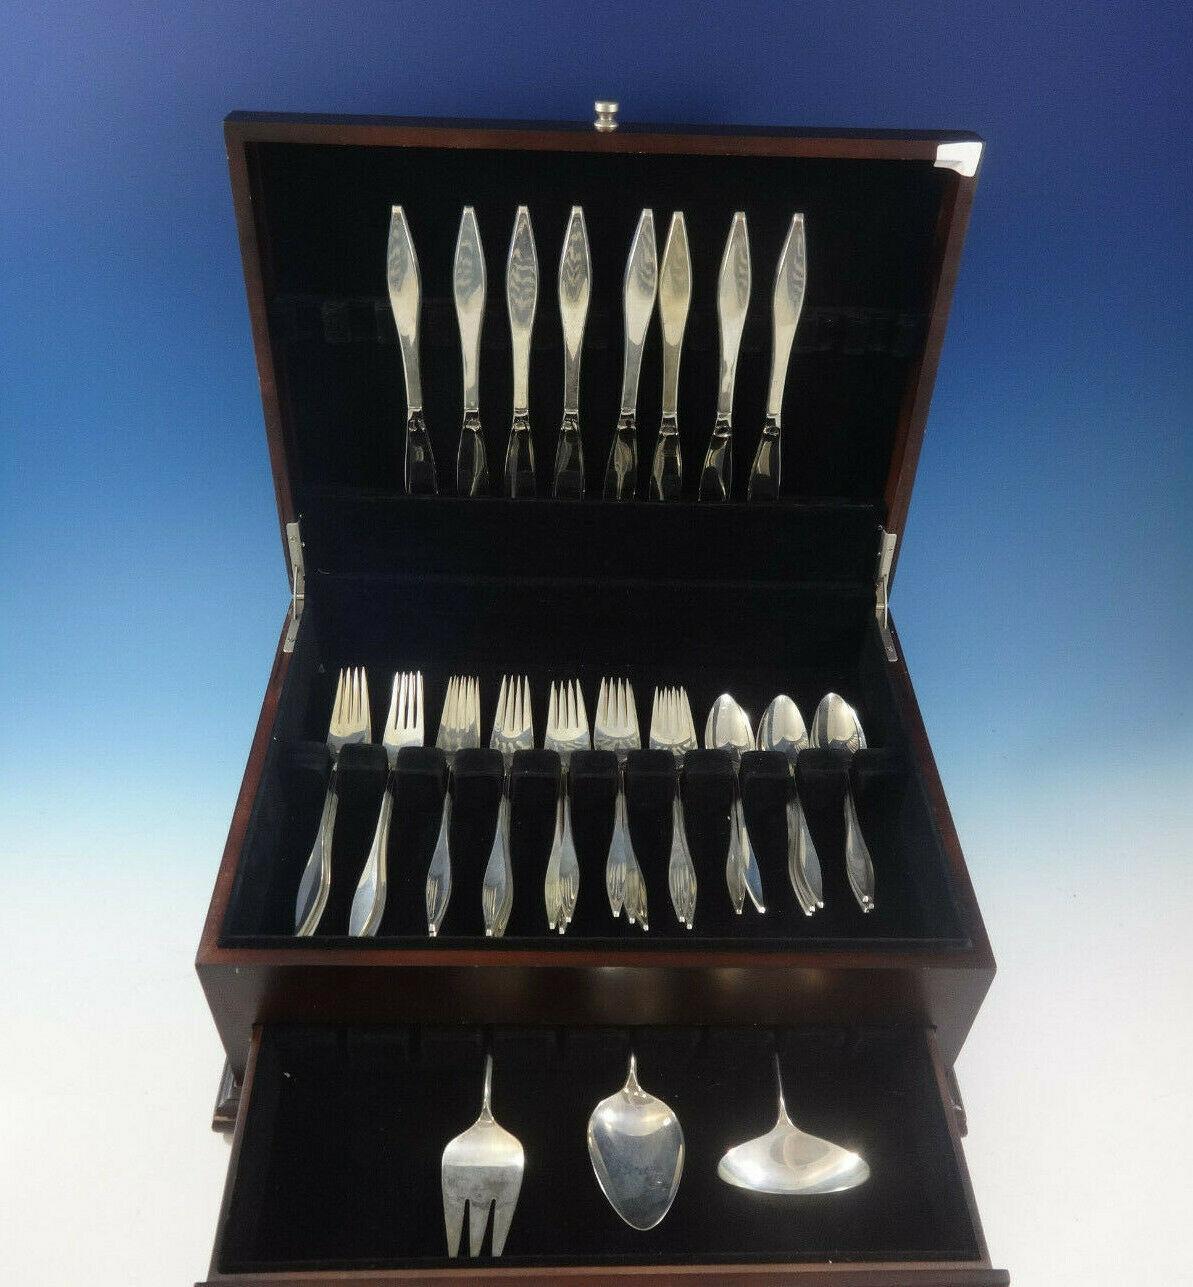 Mid-Century Modern Lark by Reed & Barton sterling silver flatware set - 35 pieces. Designed by John Prip. This set includes:

8 knives, 9